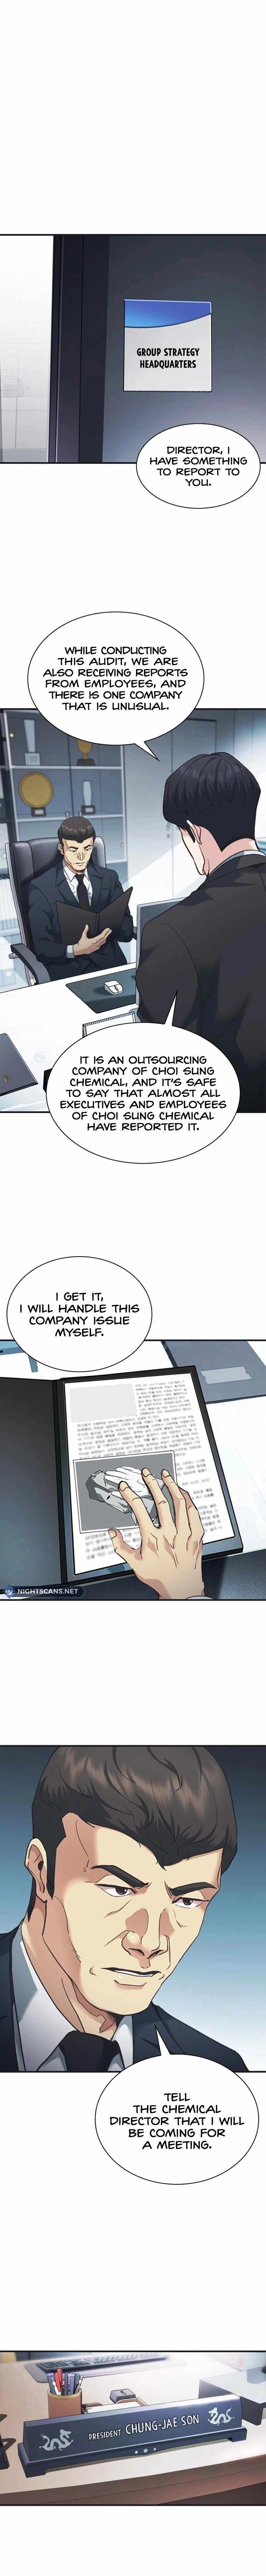 Chairman Kang, The New Employee - Page 2